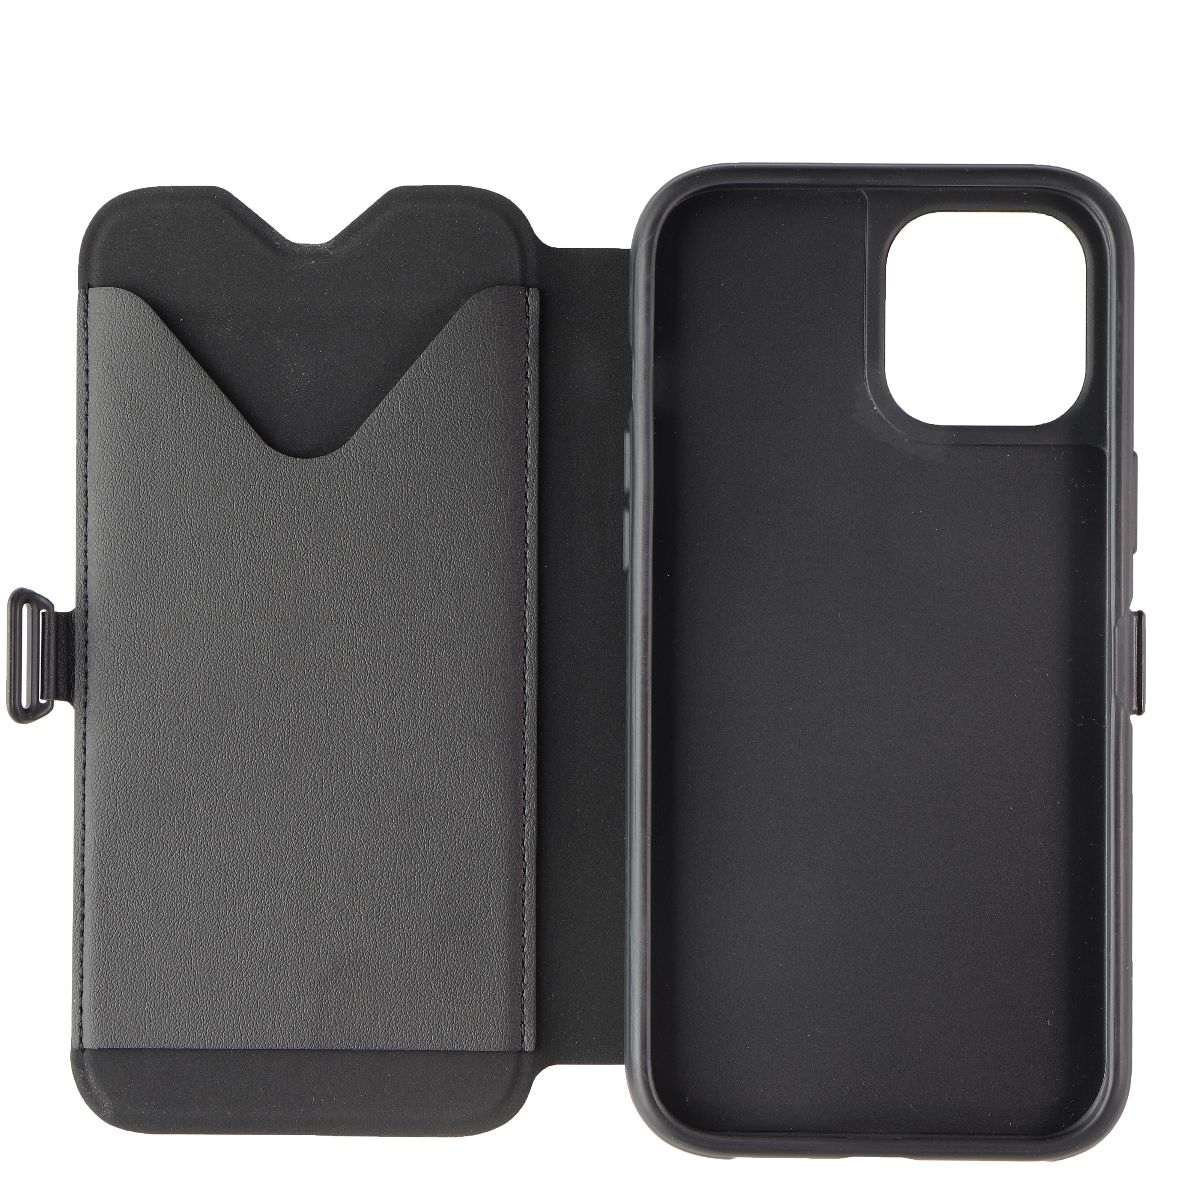 Tech21 Evo Wallet Case For Apple IPhone 12 Pro Max - Black (Refurbished)